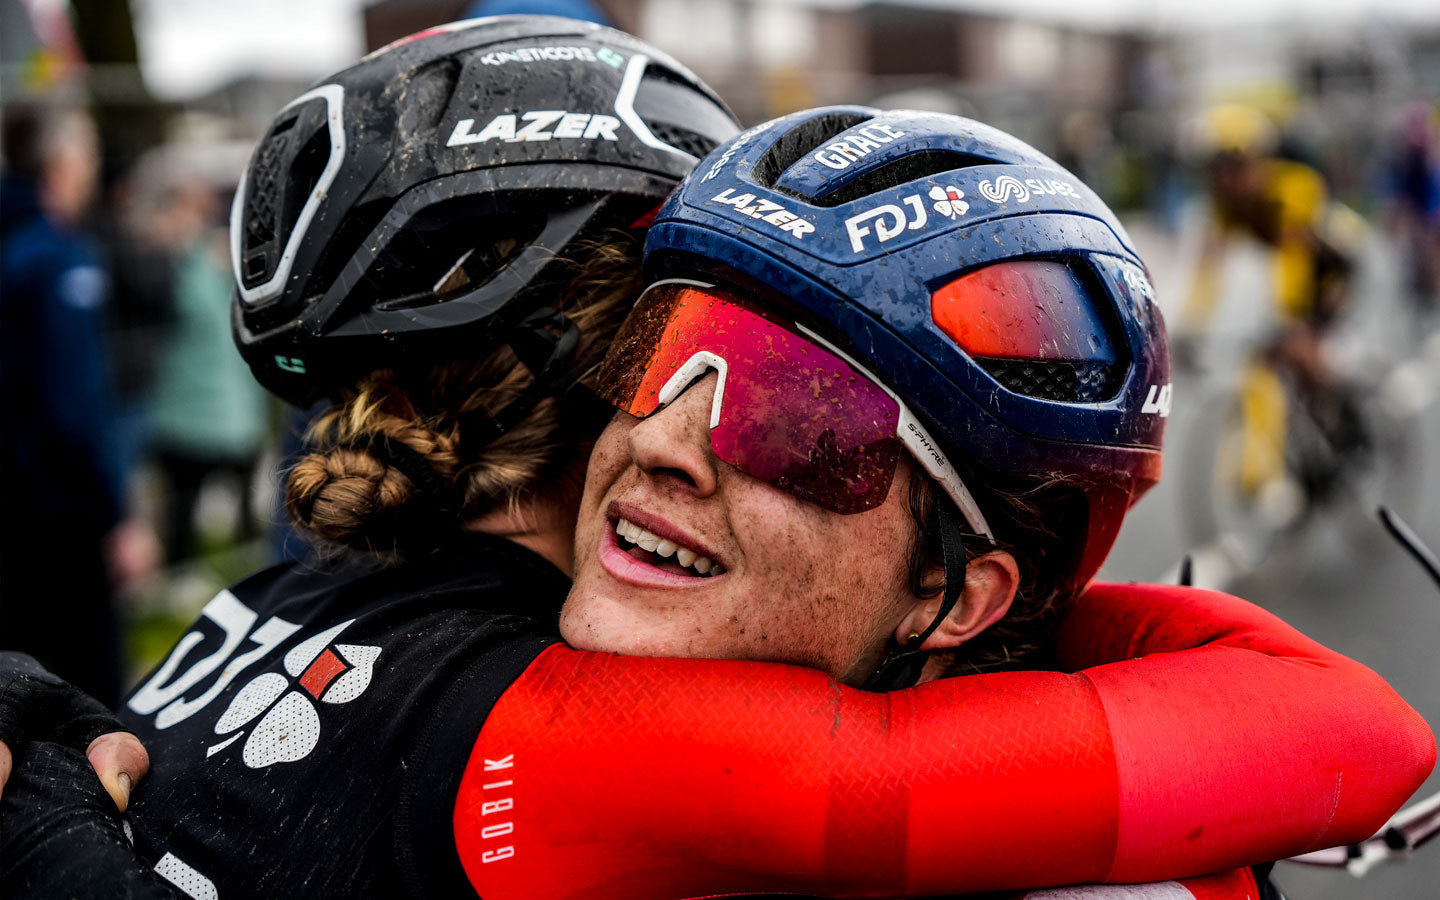 Two FDJ team riders Suez embrace at the end of the Amstel Gold Race. Their mud-covered faces and their equipment and the smile of one of them show the hardness of the race and the satisfaction of the cyclist who achieves it.